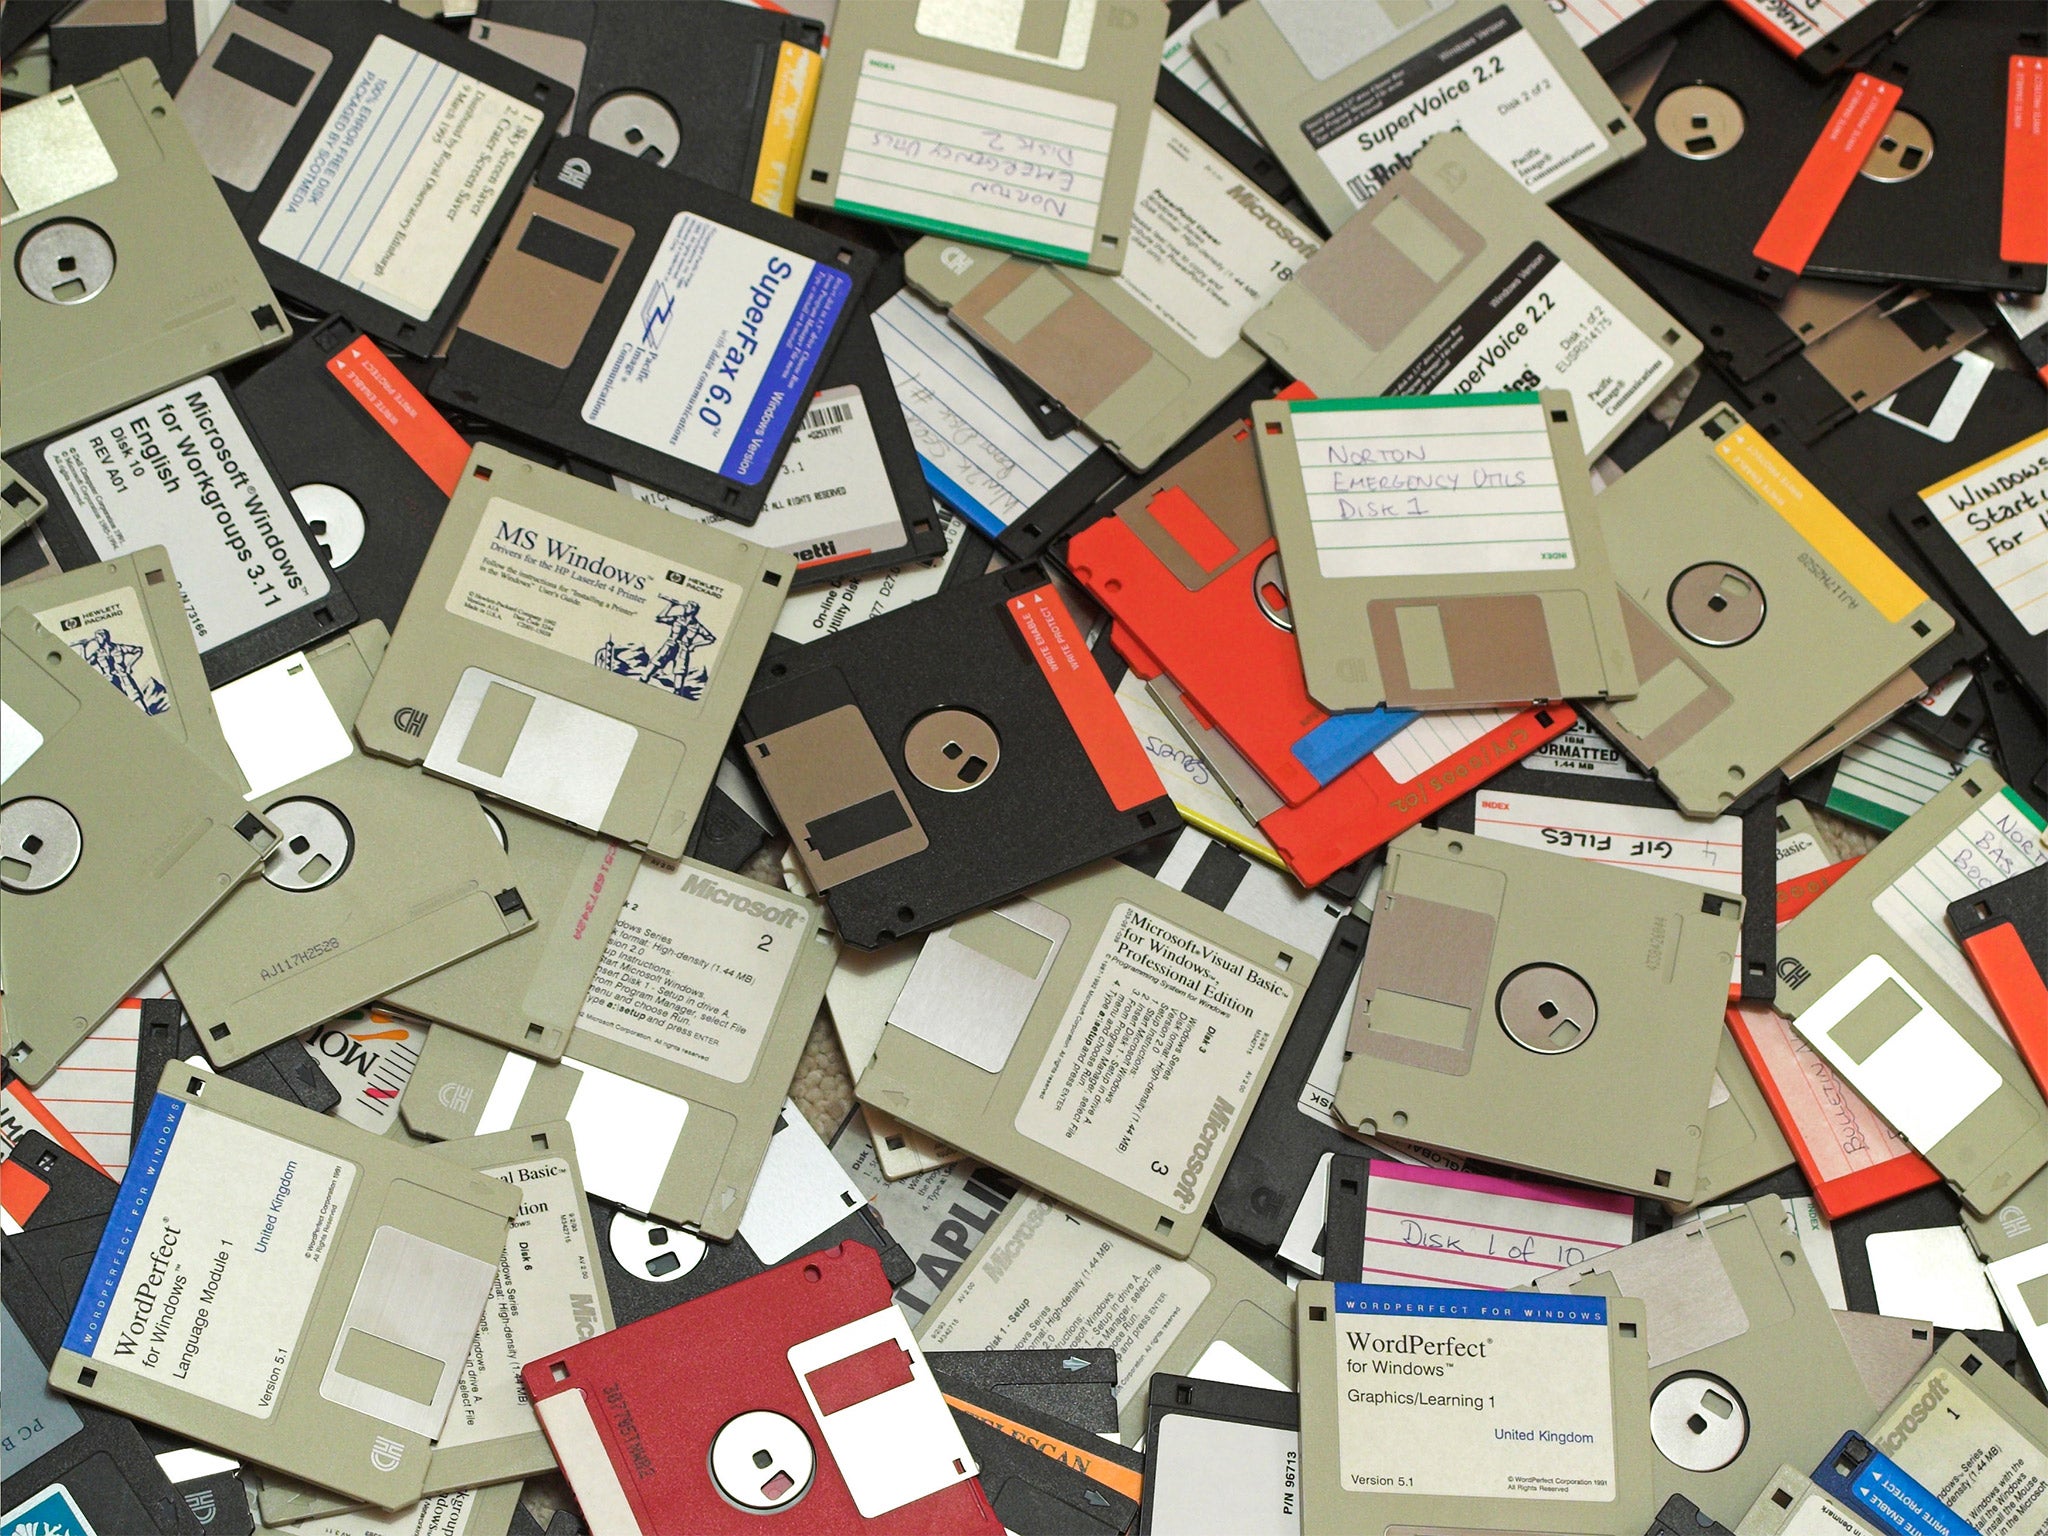 Out with the old: Verbatim has stopped making floppy disks